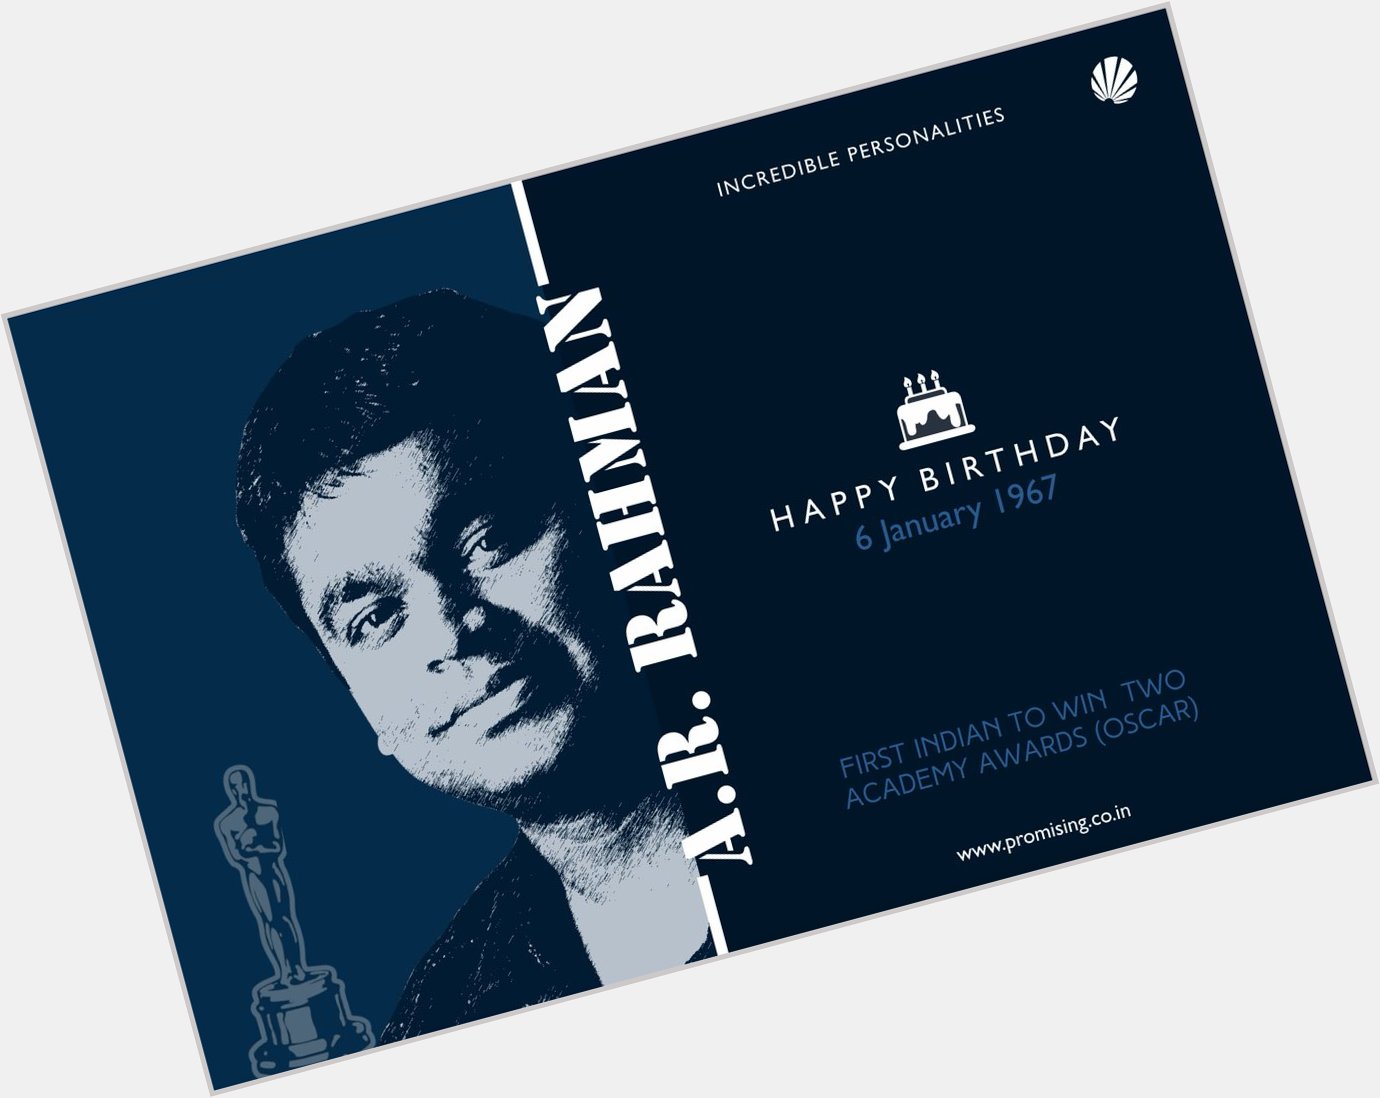 Happy birthday A.R.Rahman..A great musician, a great human being..  